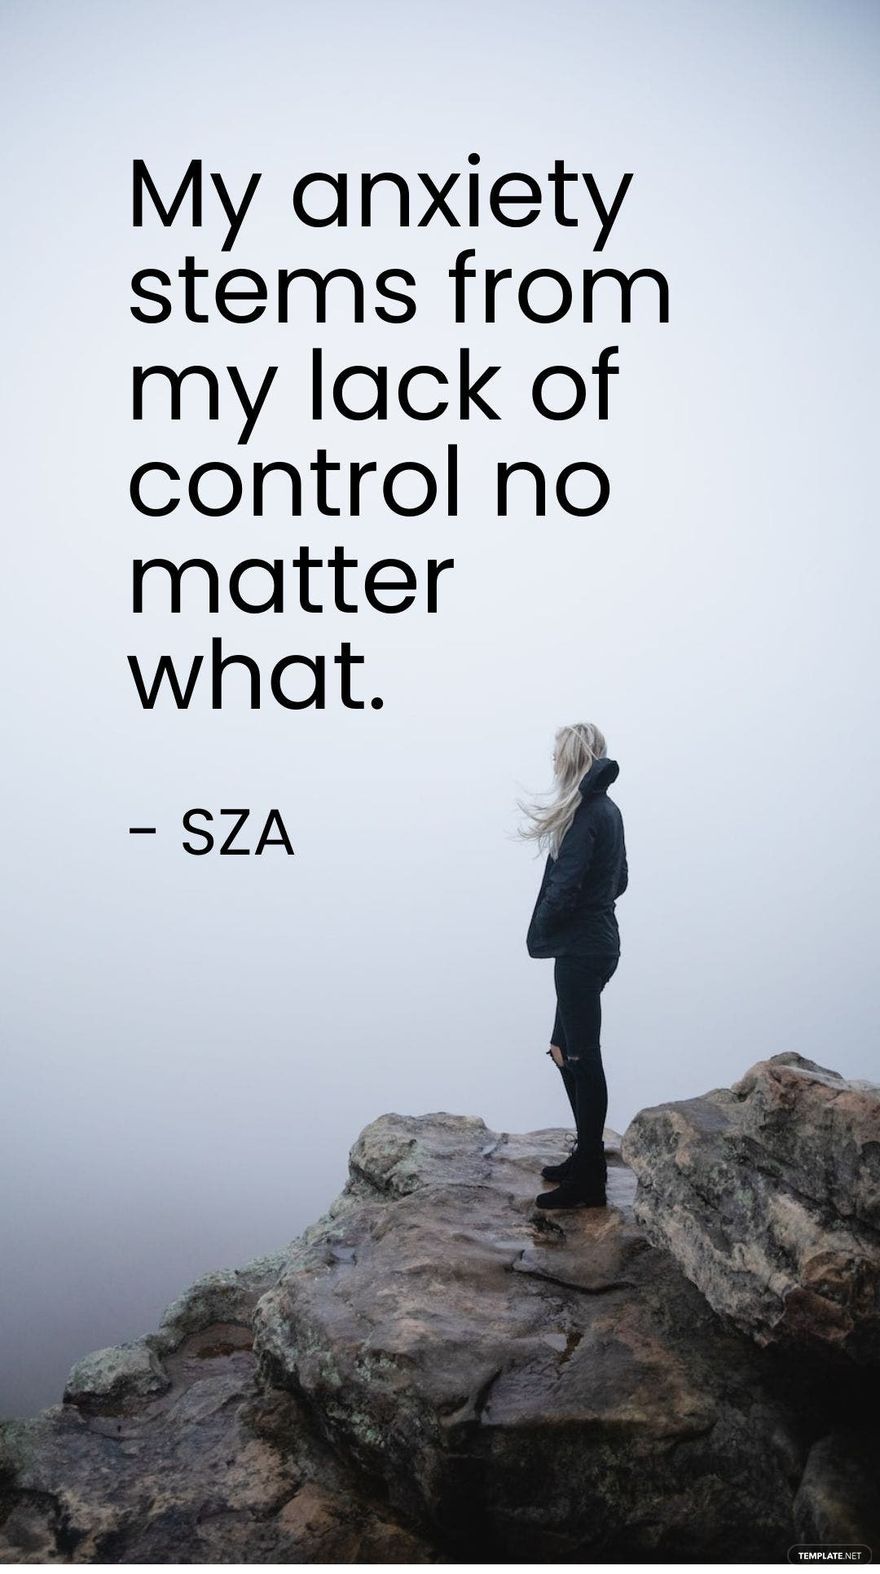 SZA - My anxiety stems from my lack of control no matter what. in JPG